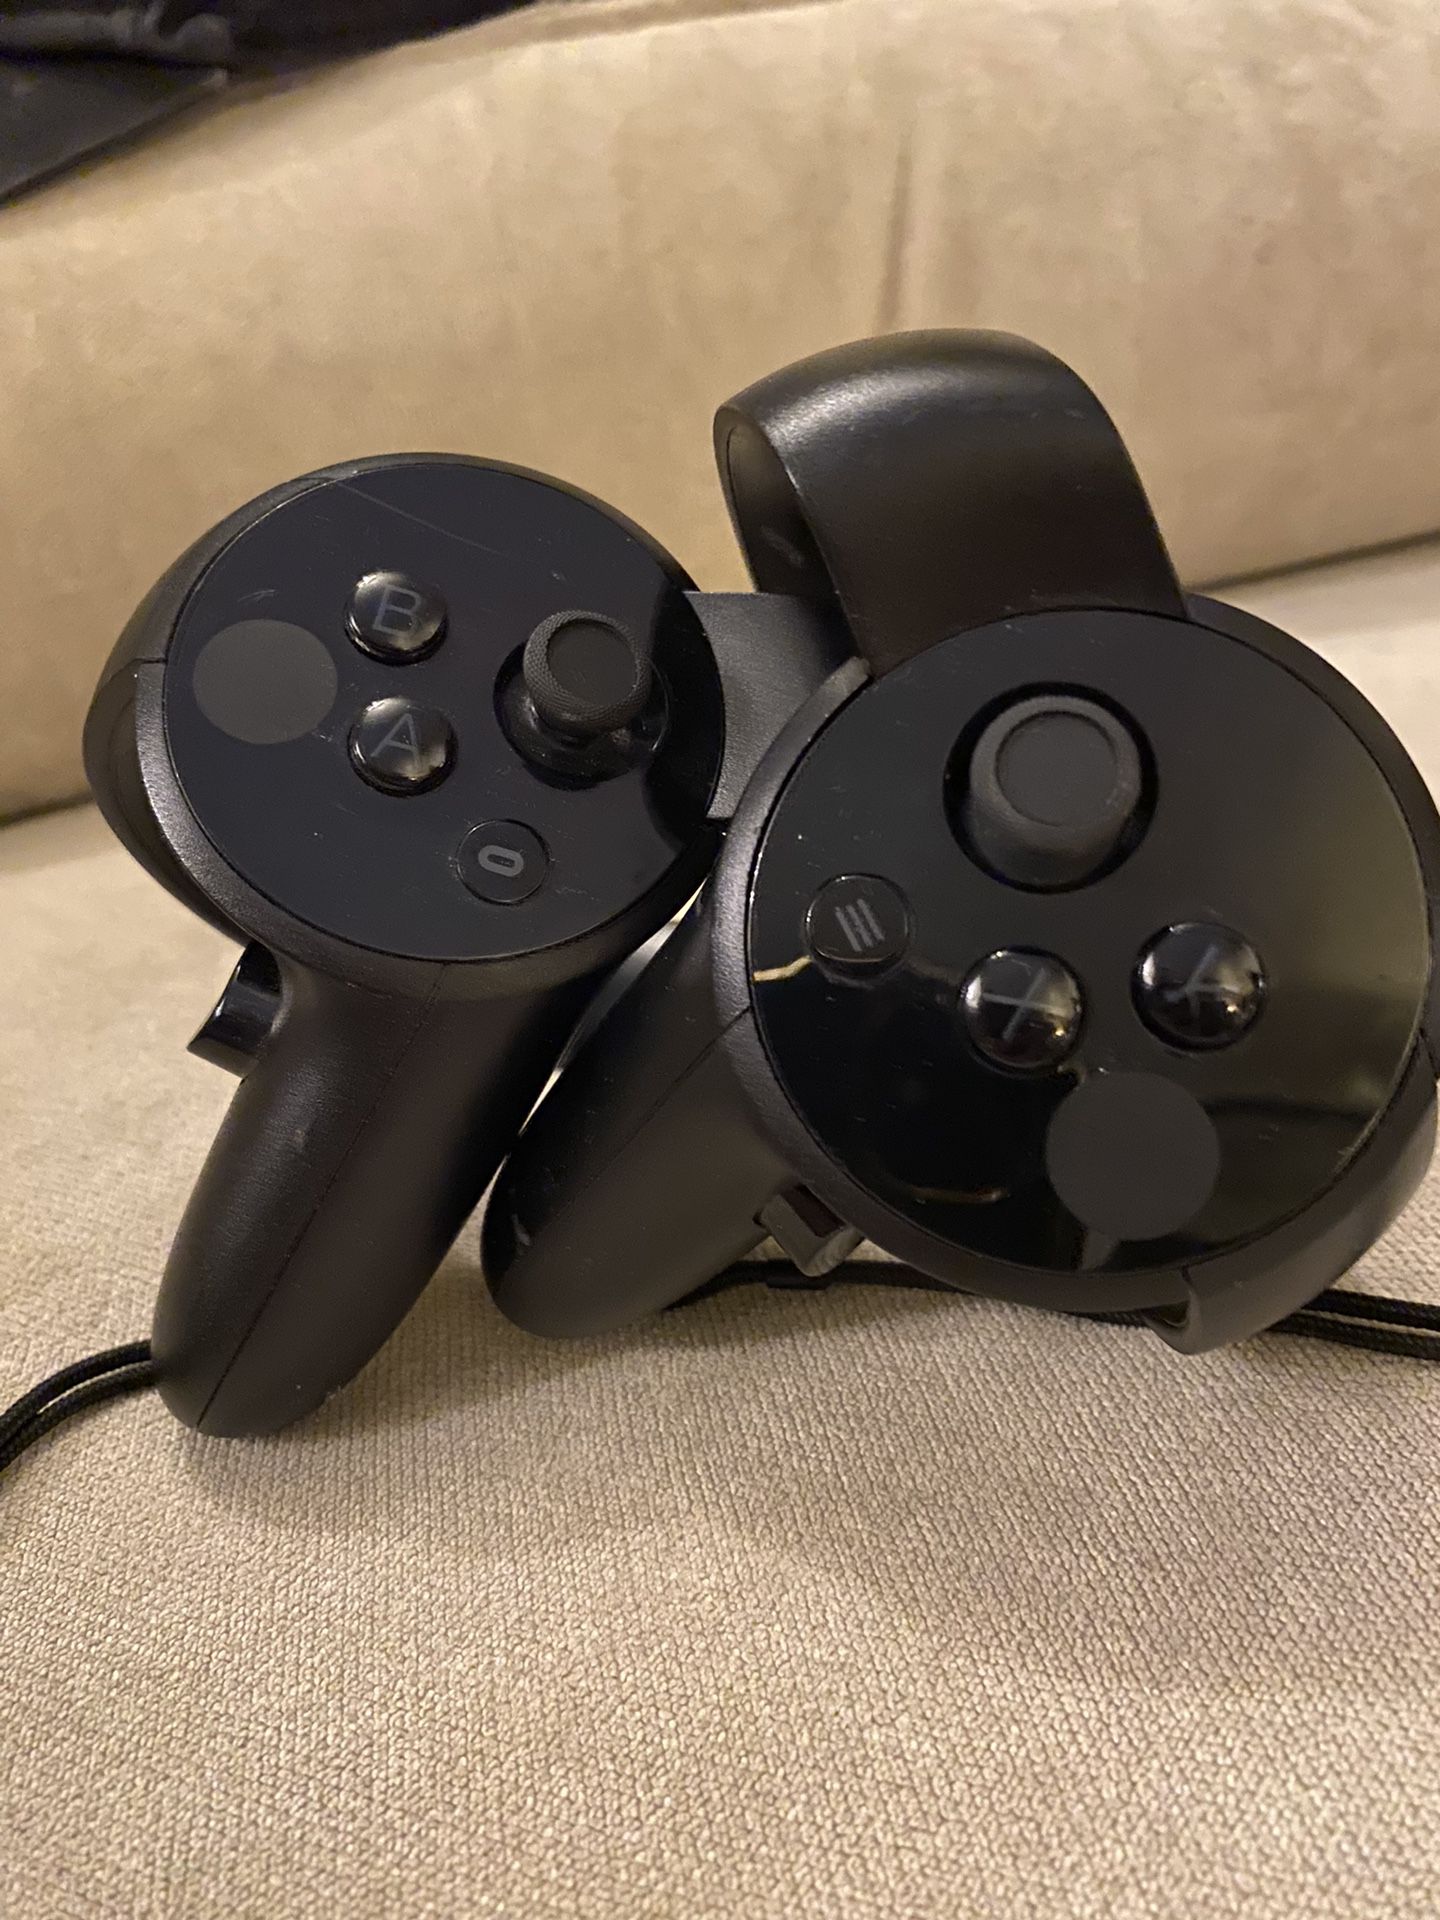 Rift CV1 Touch Controllers VR Motion(Left & Right) for Sale Seattle, WA OfferUp